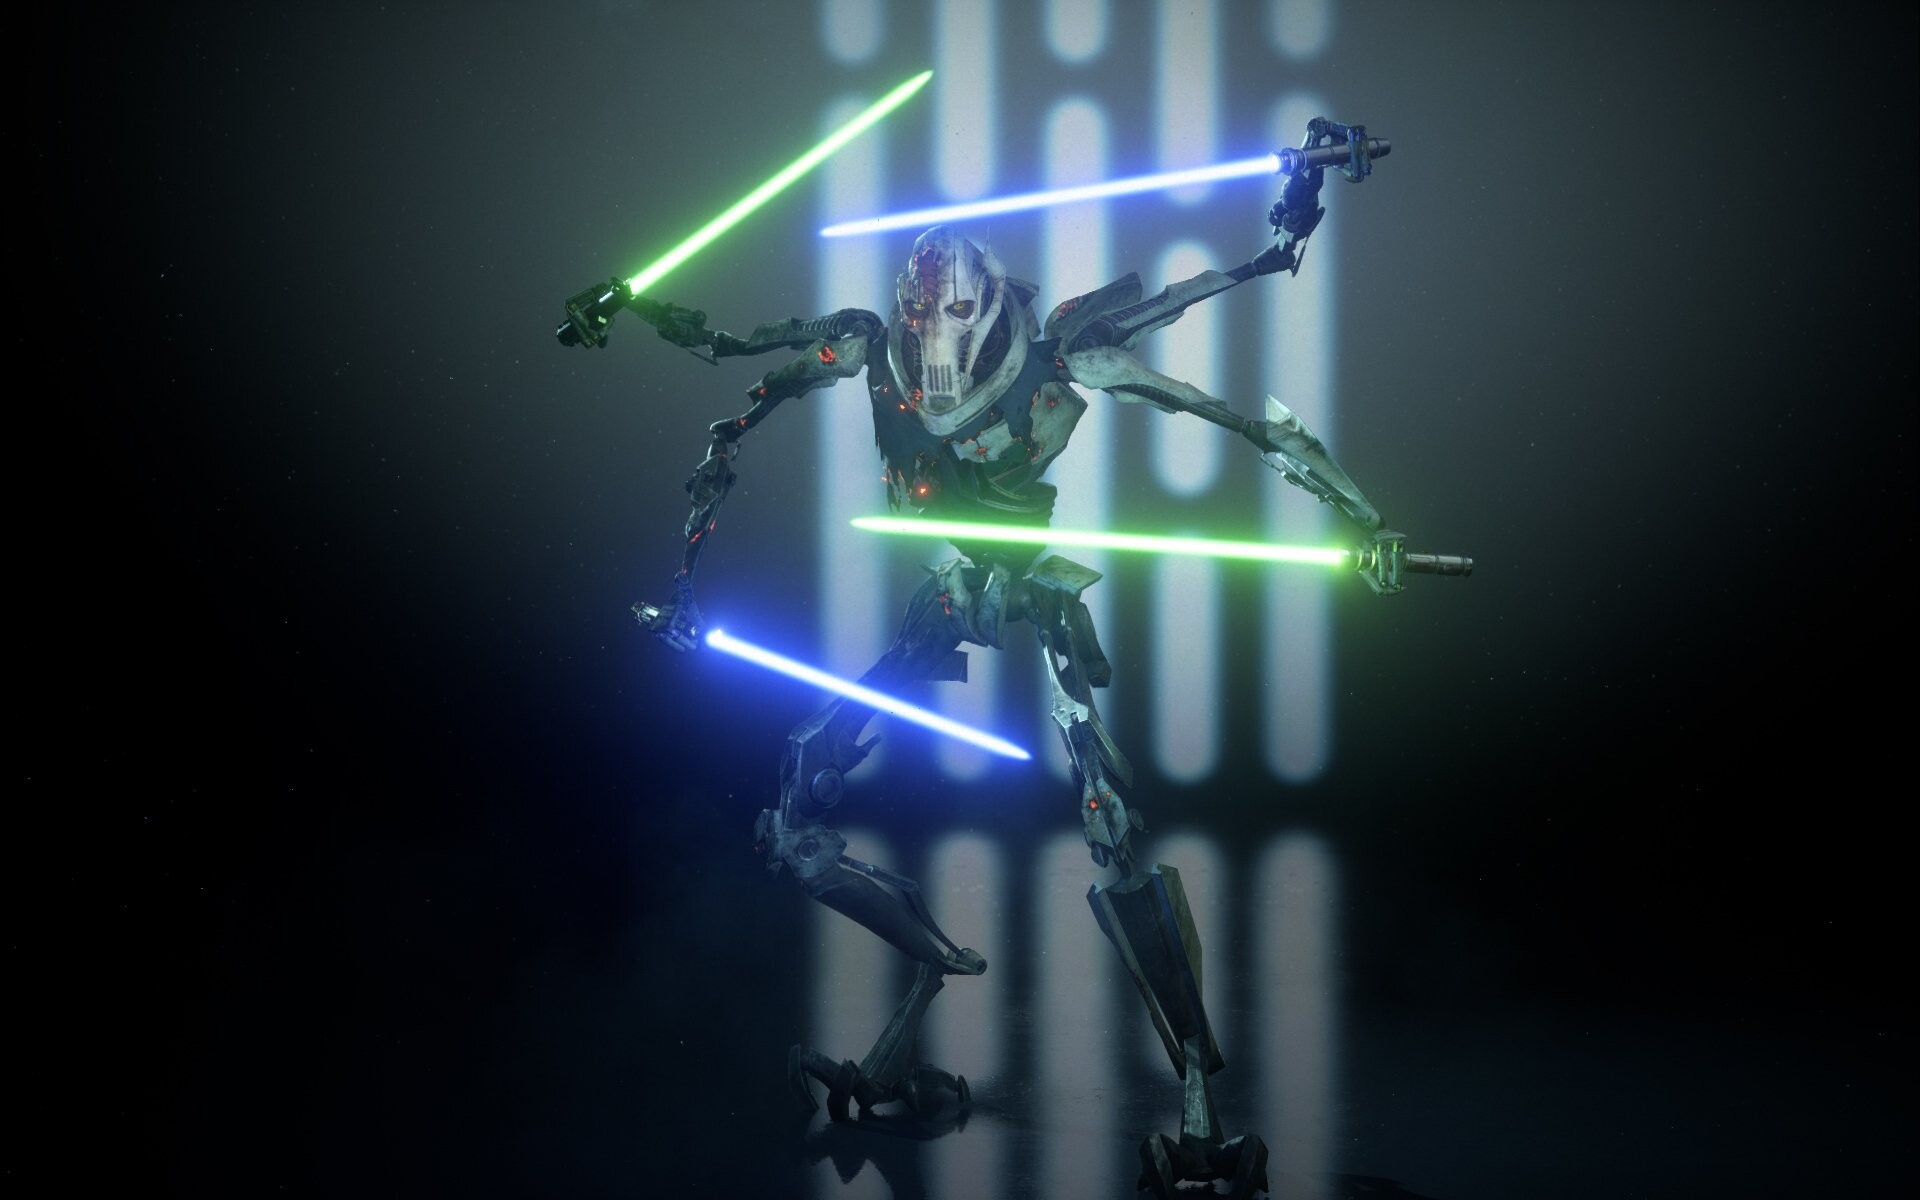 General Grievous: The arts of lightsaber combat, Intense alterations and enhancements to his cybernetic body. 1920x1200 HD Background.